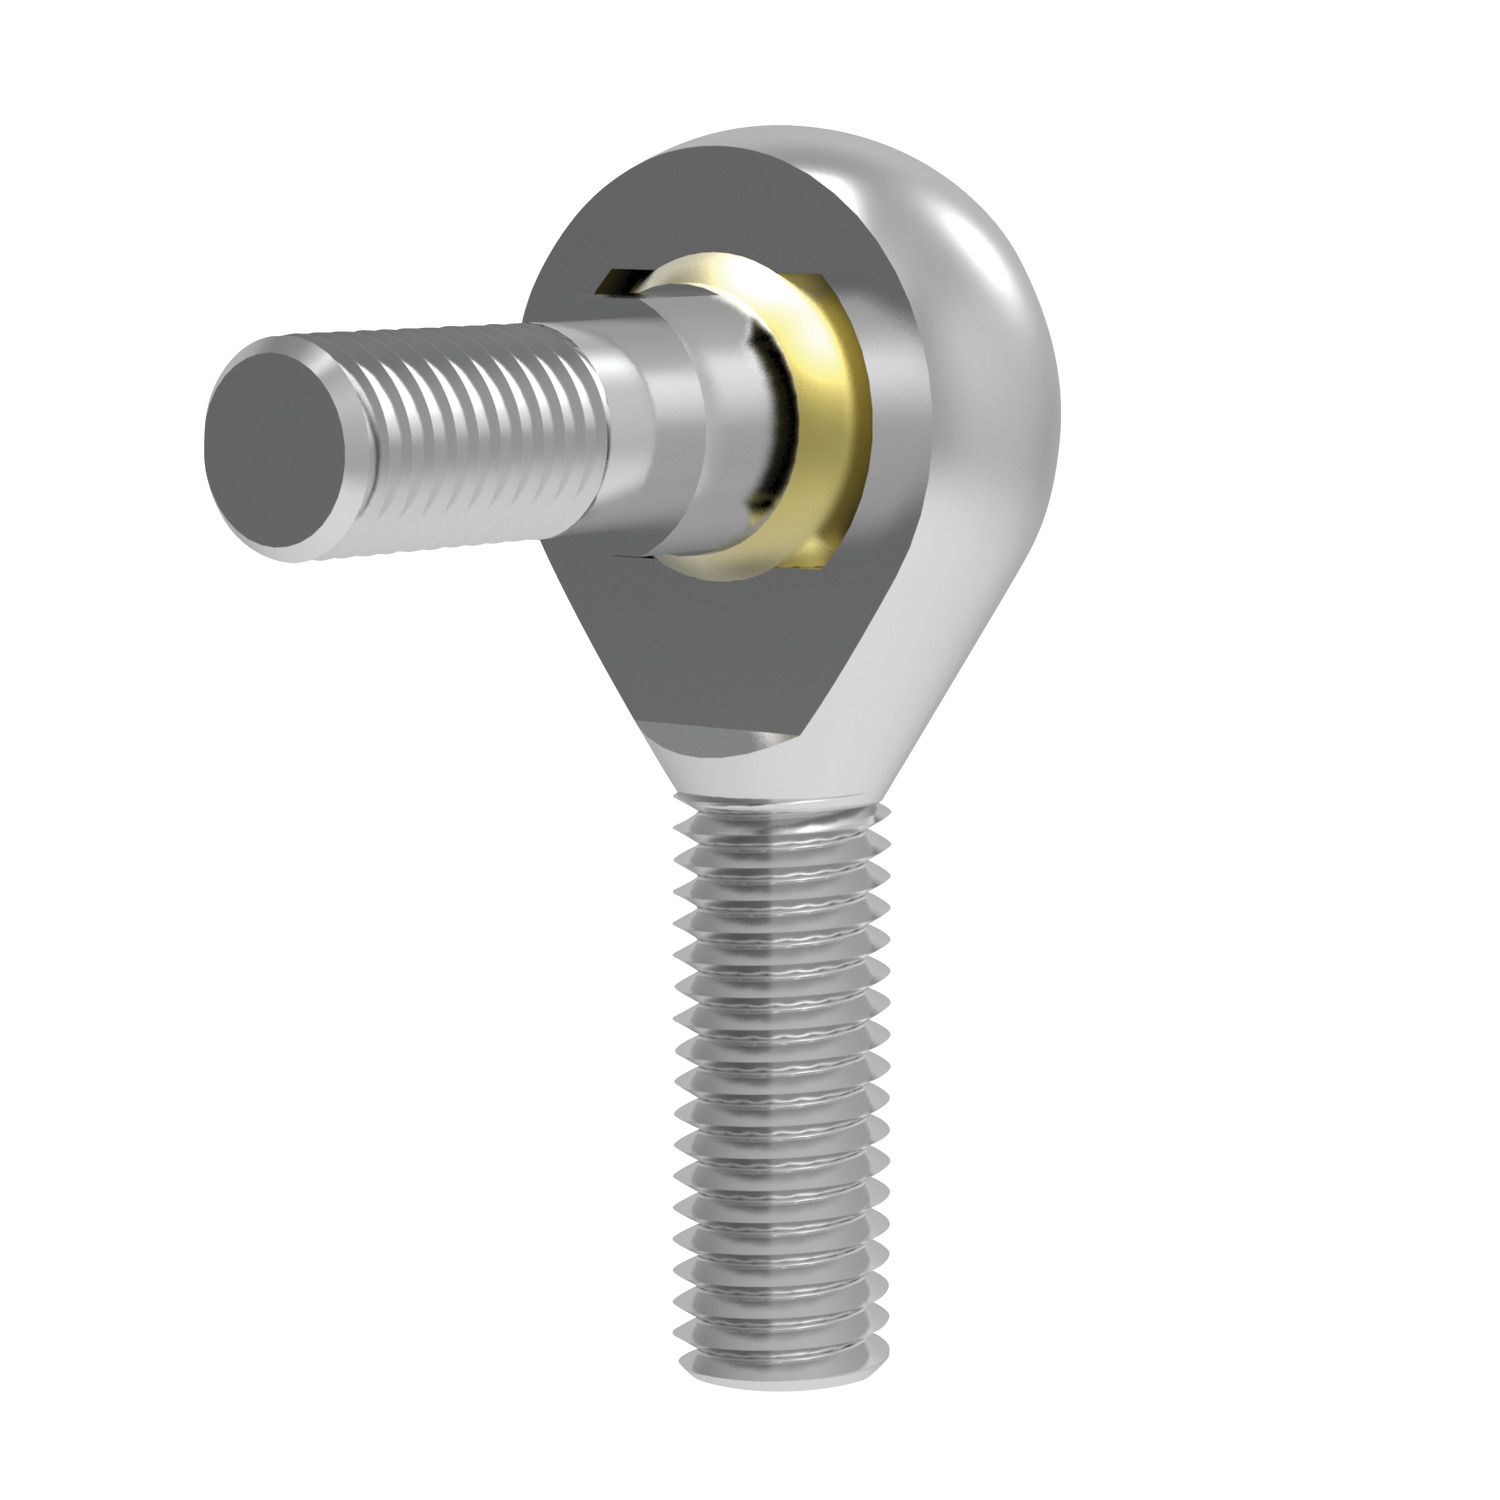 Stainless Rod End with stud Fully stainless steel and maintenance free heavy duty male rod end with stud.